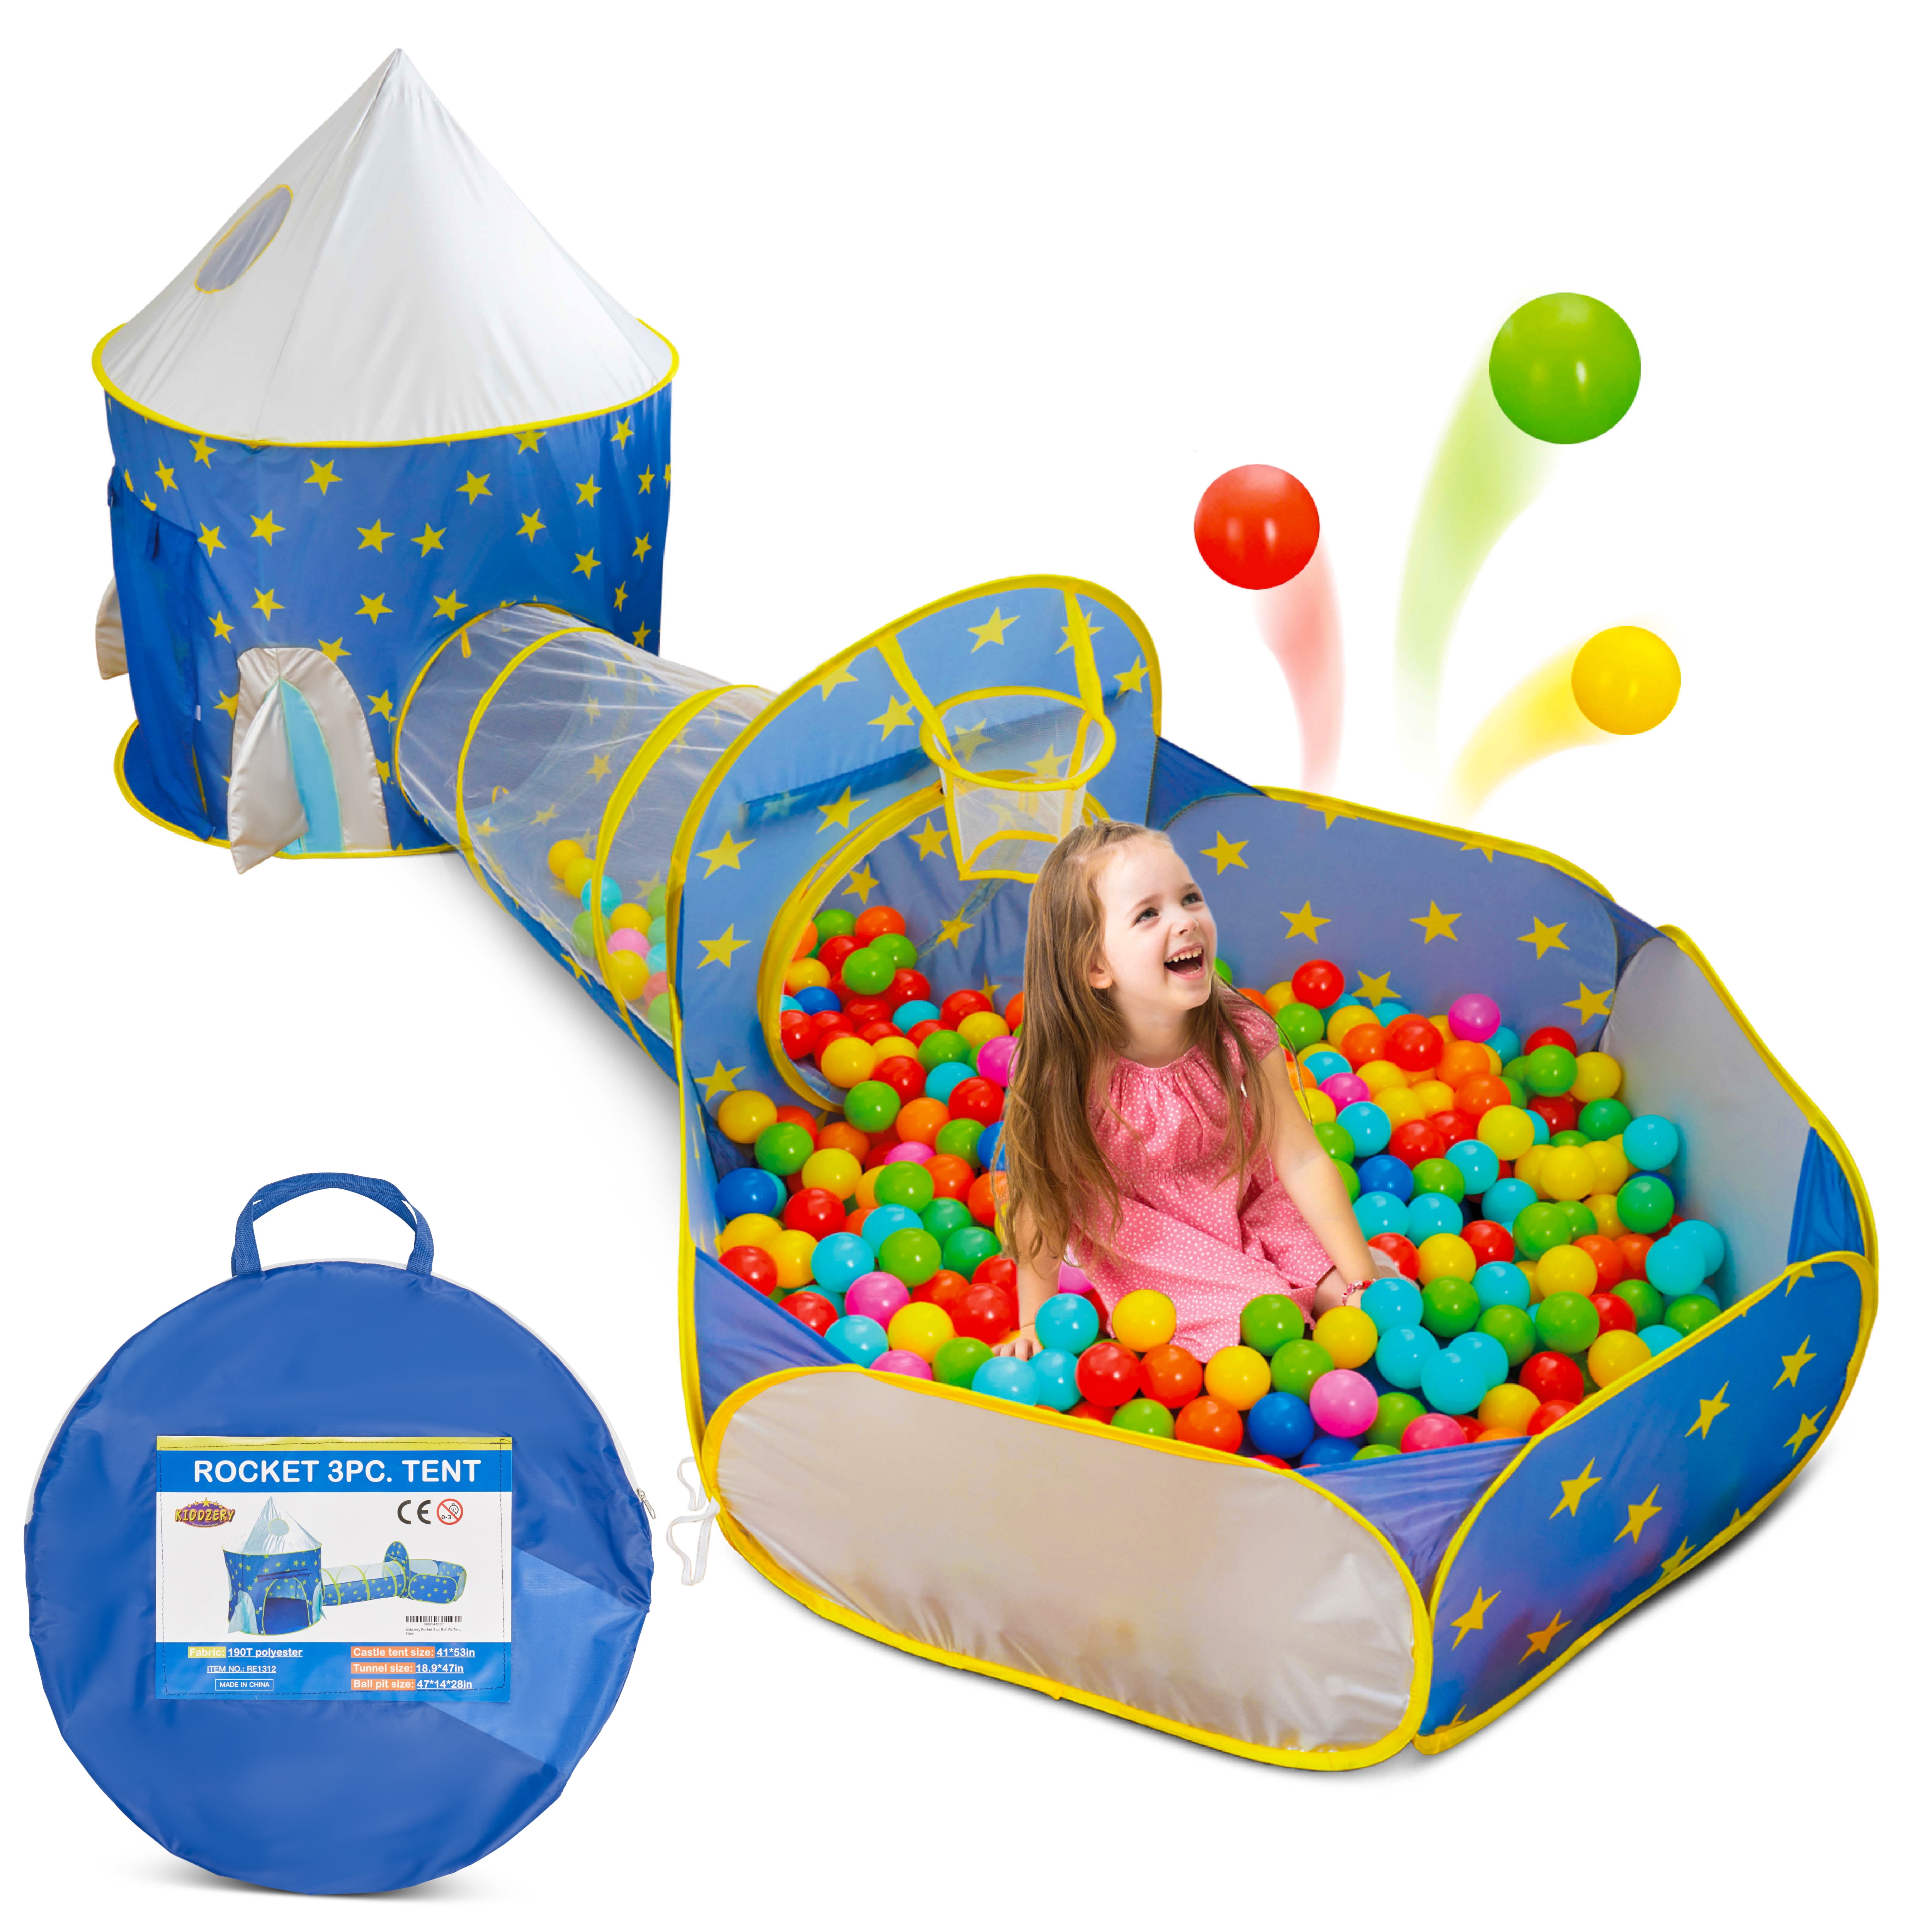 3 In 1 Kids Pop Up Play House Tents Tunnel And Ball Pit Playhouse Kids Toy AUS 